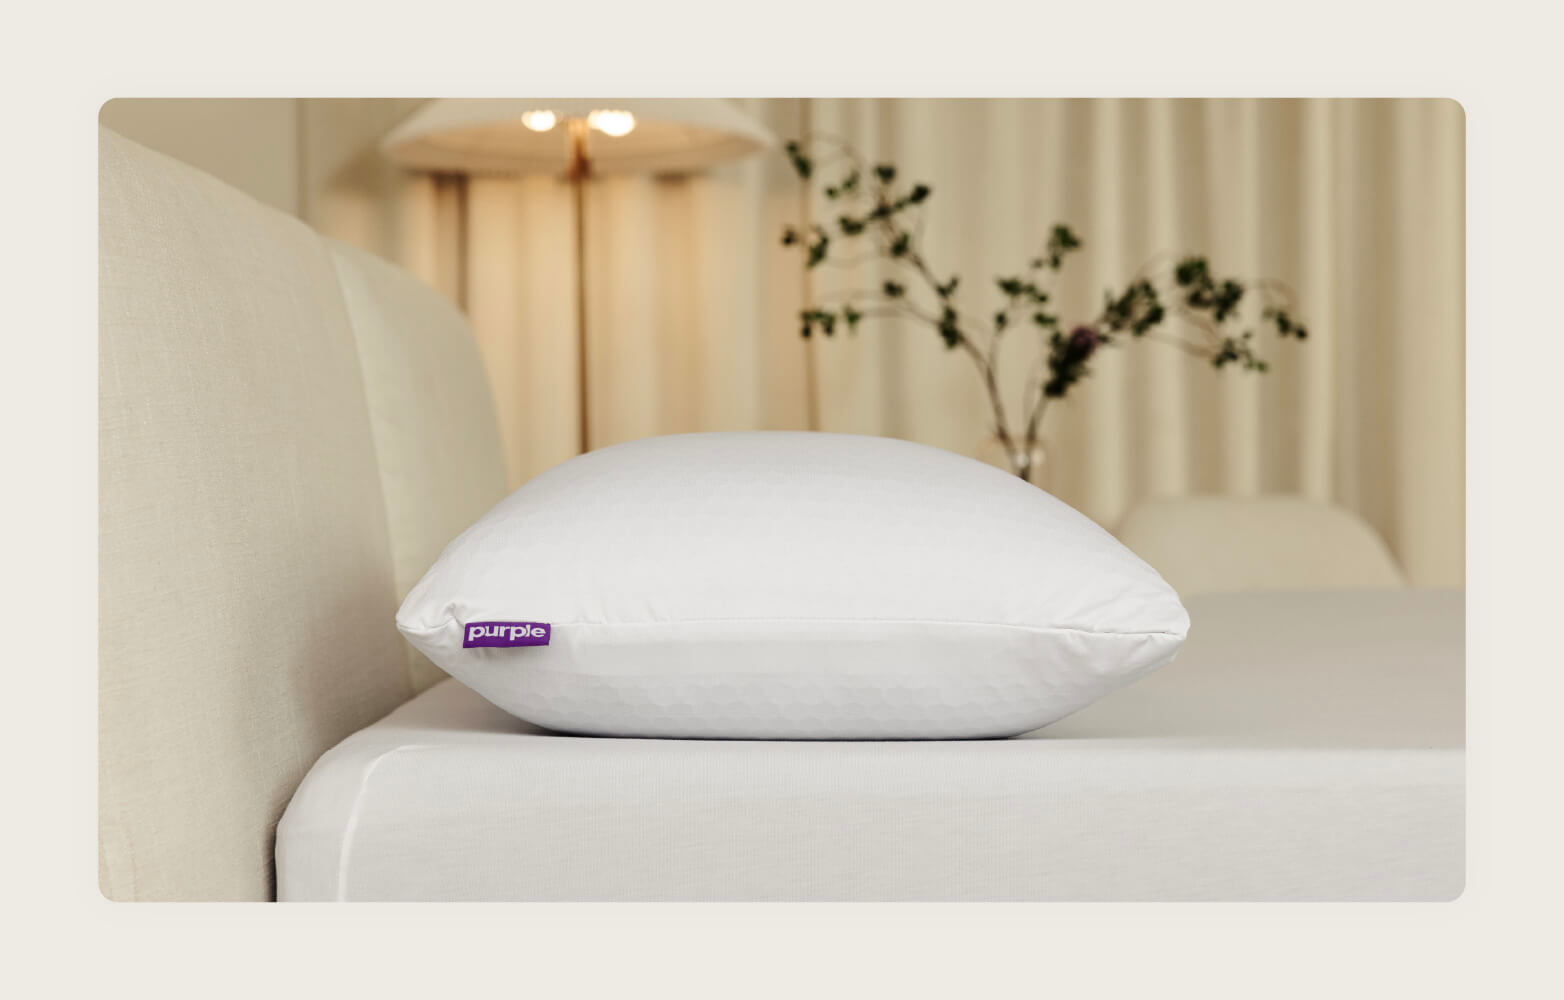 Photo of the  Purple Freeform pillow on top of a neutral bed.